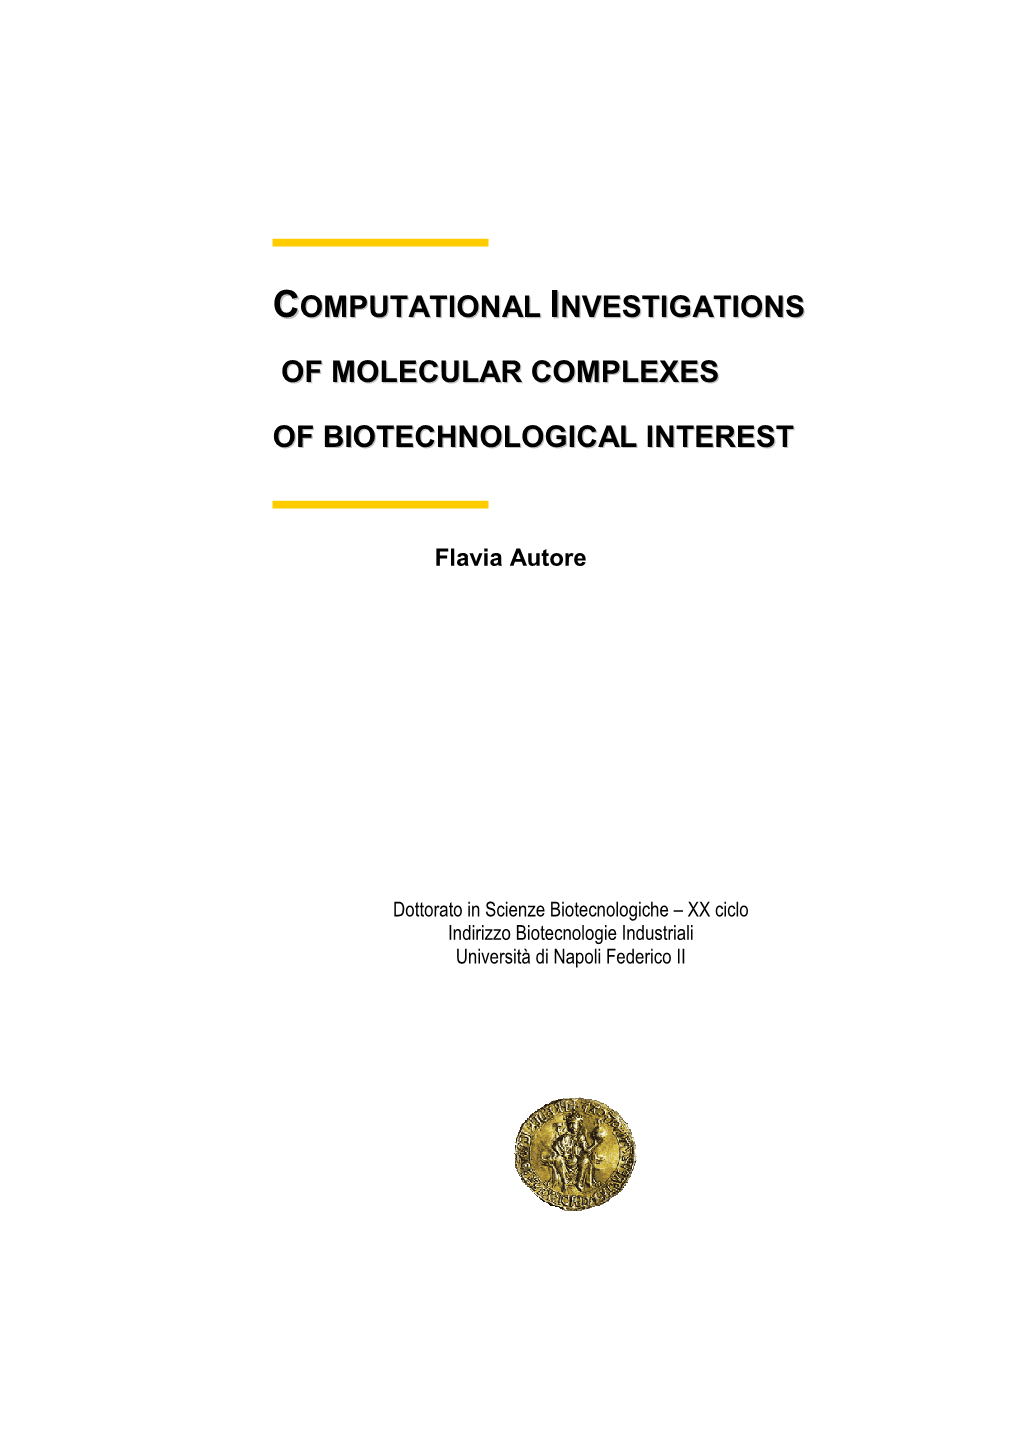 Computational Investigations of Molecular Complexes of Biotechnological Interest